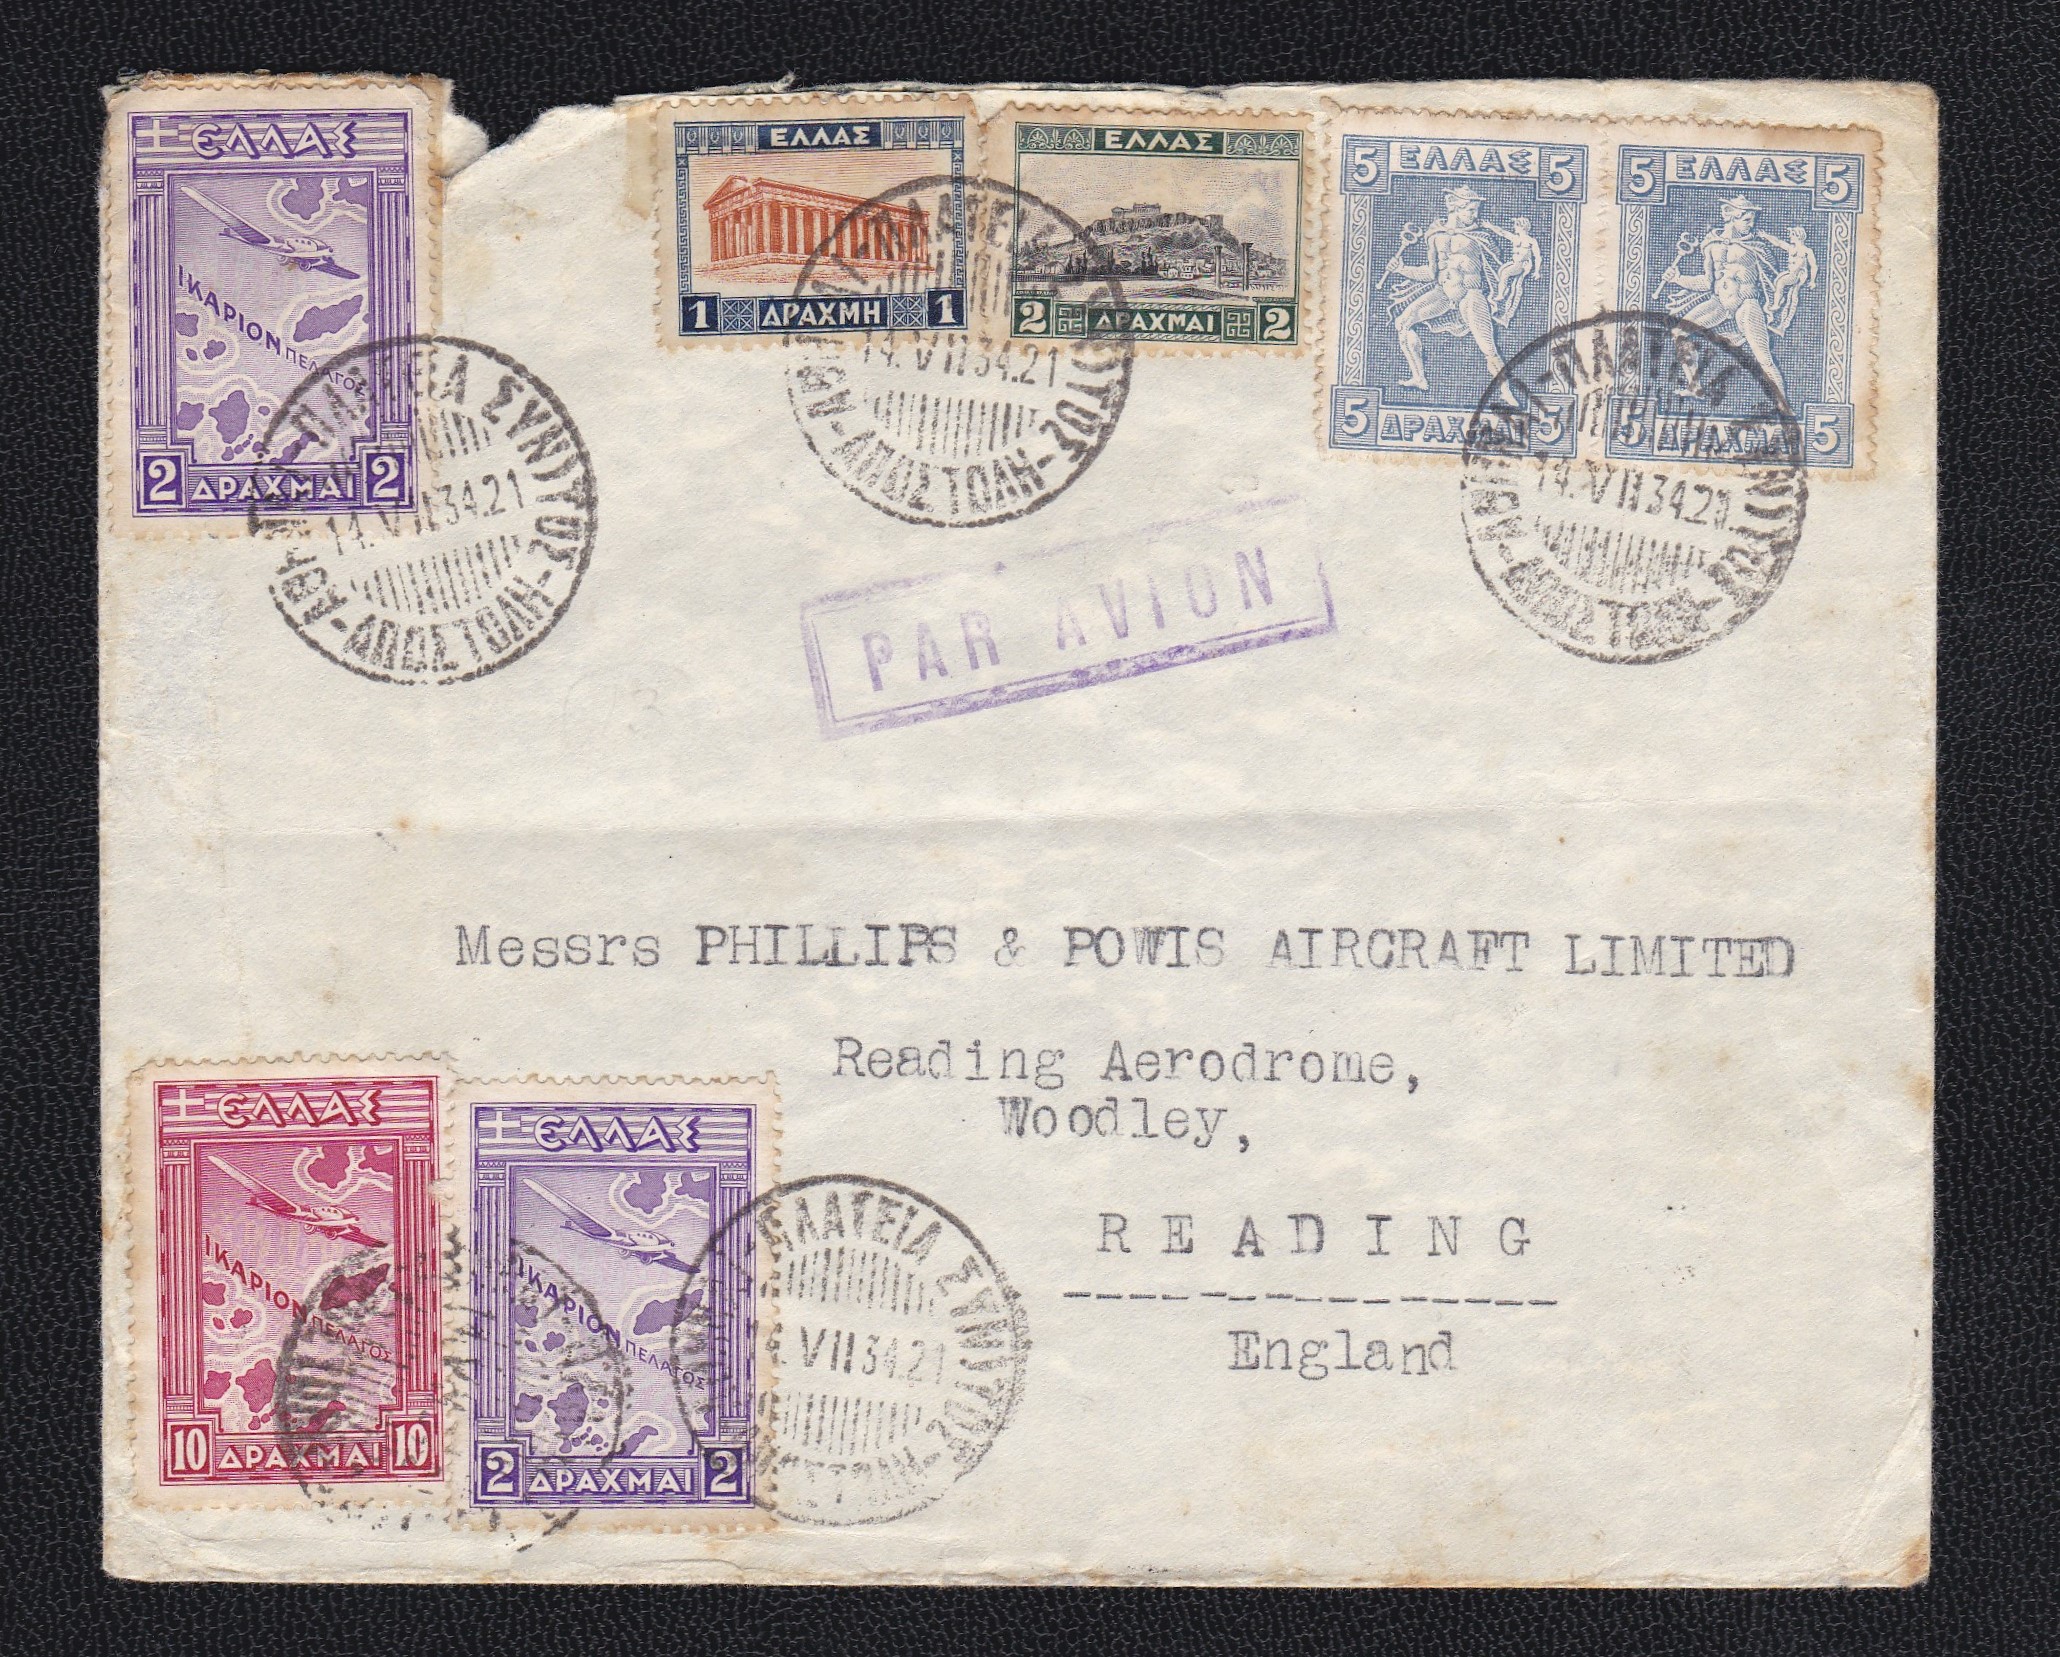 Greece 1934 Airmail Commercial Cover to England with Aiss, a little tatty but an attractive cover